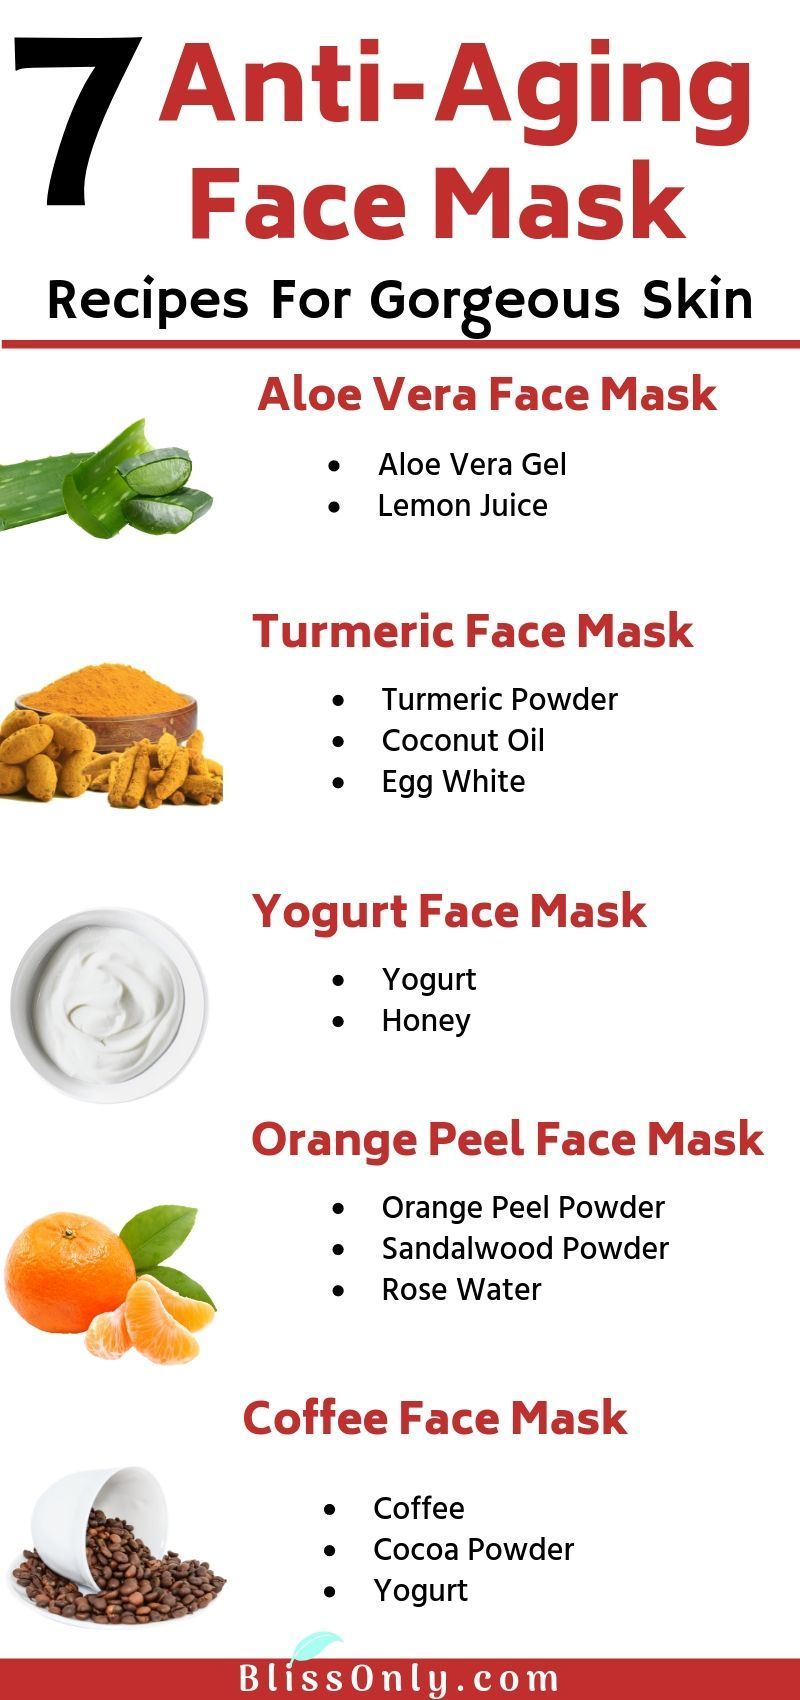 7 Best Anti-Aging Face Mask For Gorgeous Skin - BlissOnly - 7 Best Anti-Aging Face Mask For Gorgeous Skin - BlissOnly -   16 beauty Care face ideas